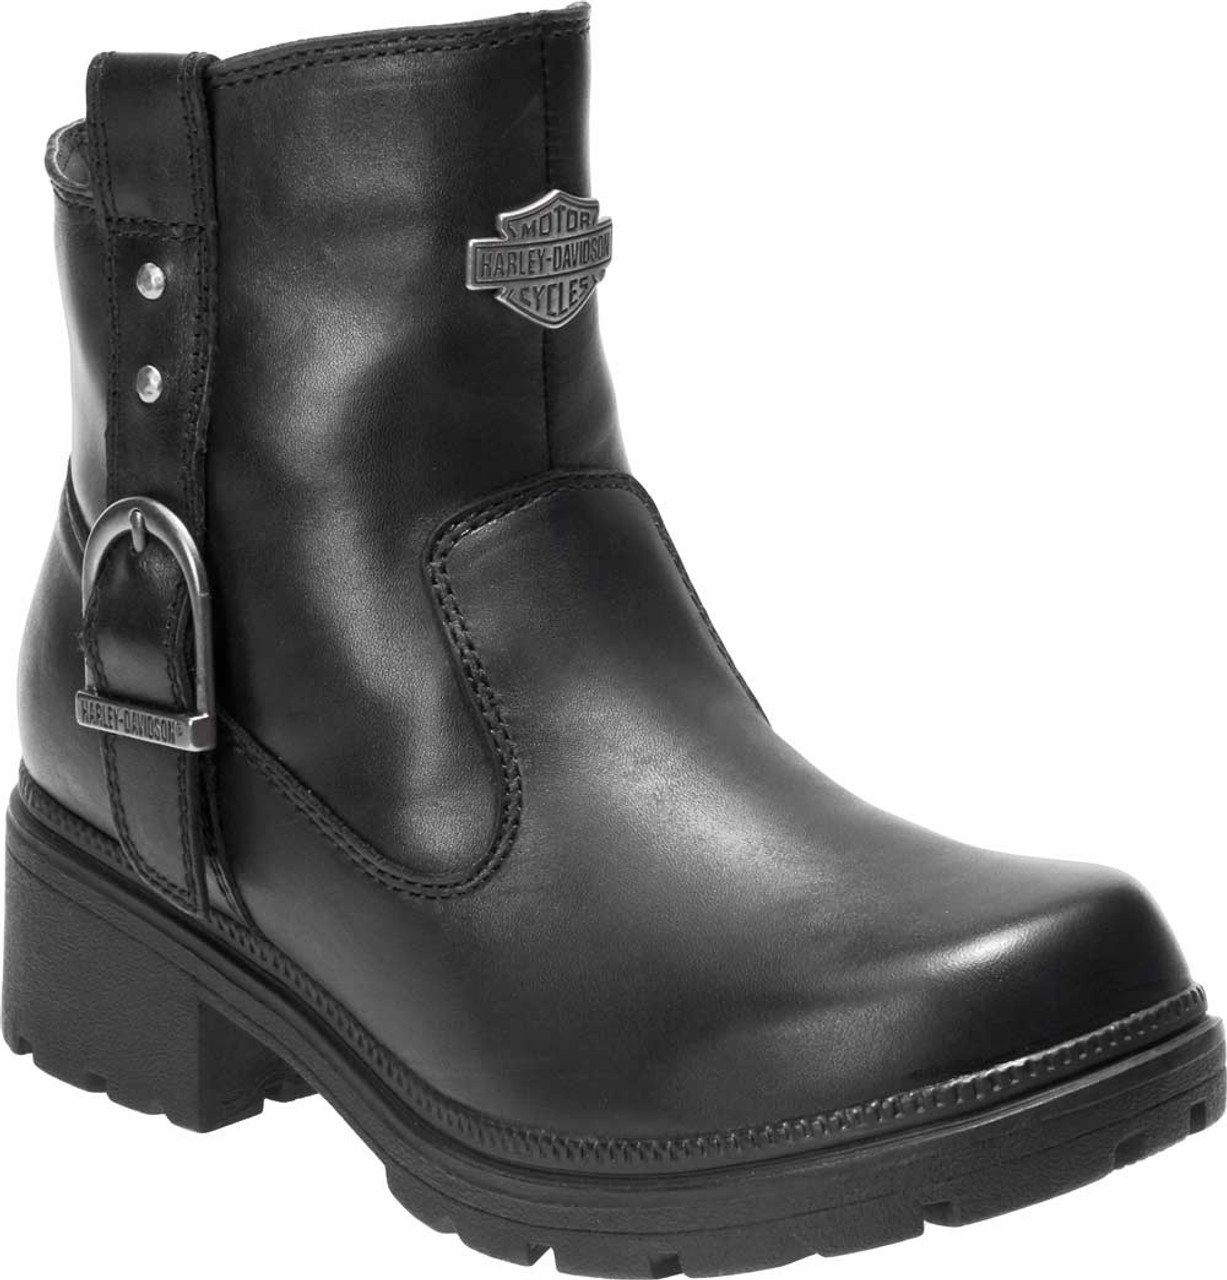 Black ankle boots + FREE SHIPPING